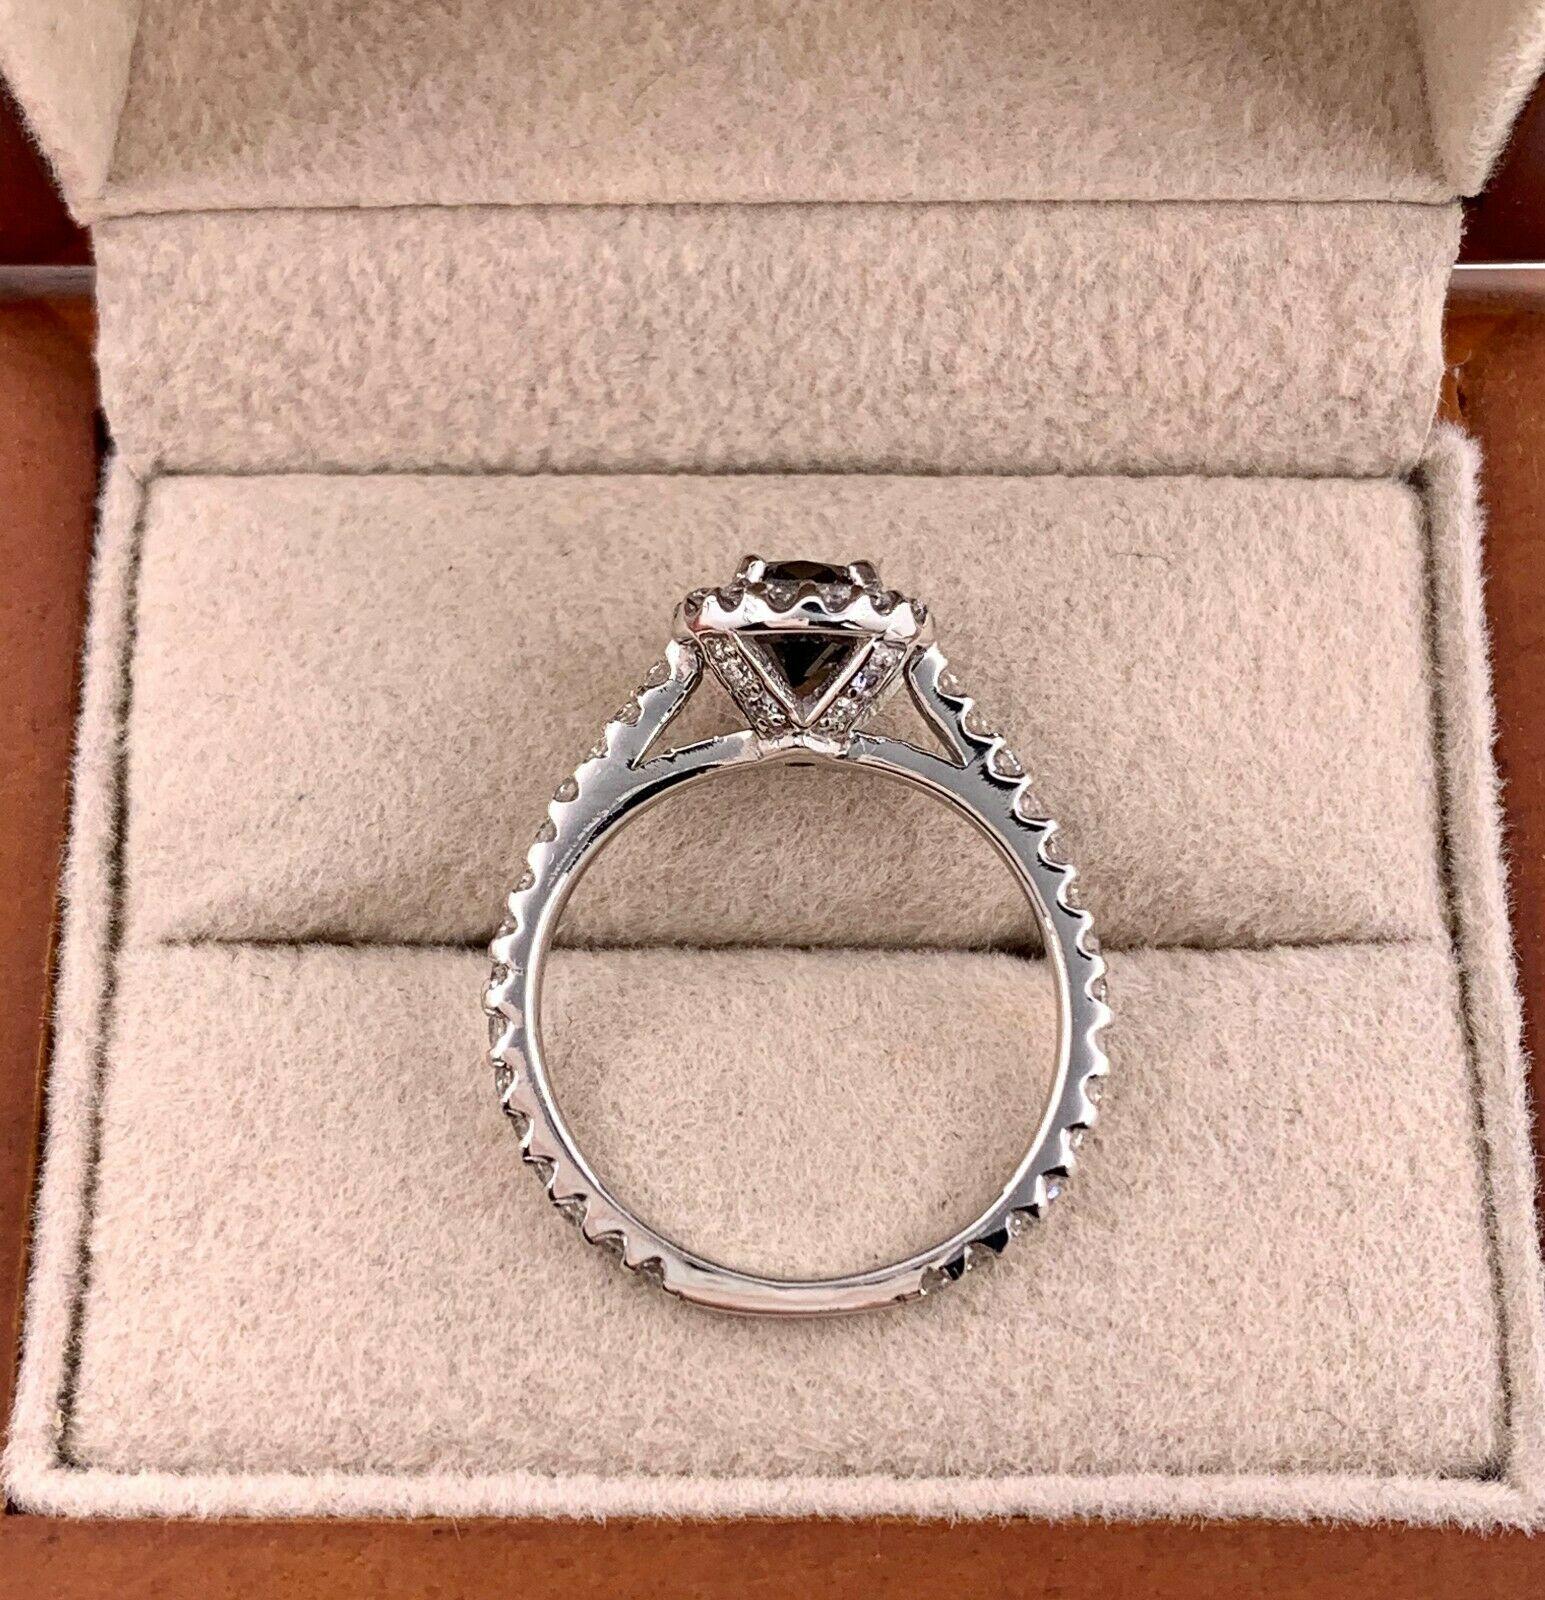 Black Diamond Halo Engagement Ring 1.32 Carat 14 Karat White Gold In Excellent Condition For Sale In San Diego, CA